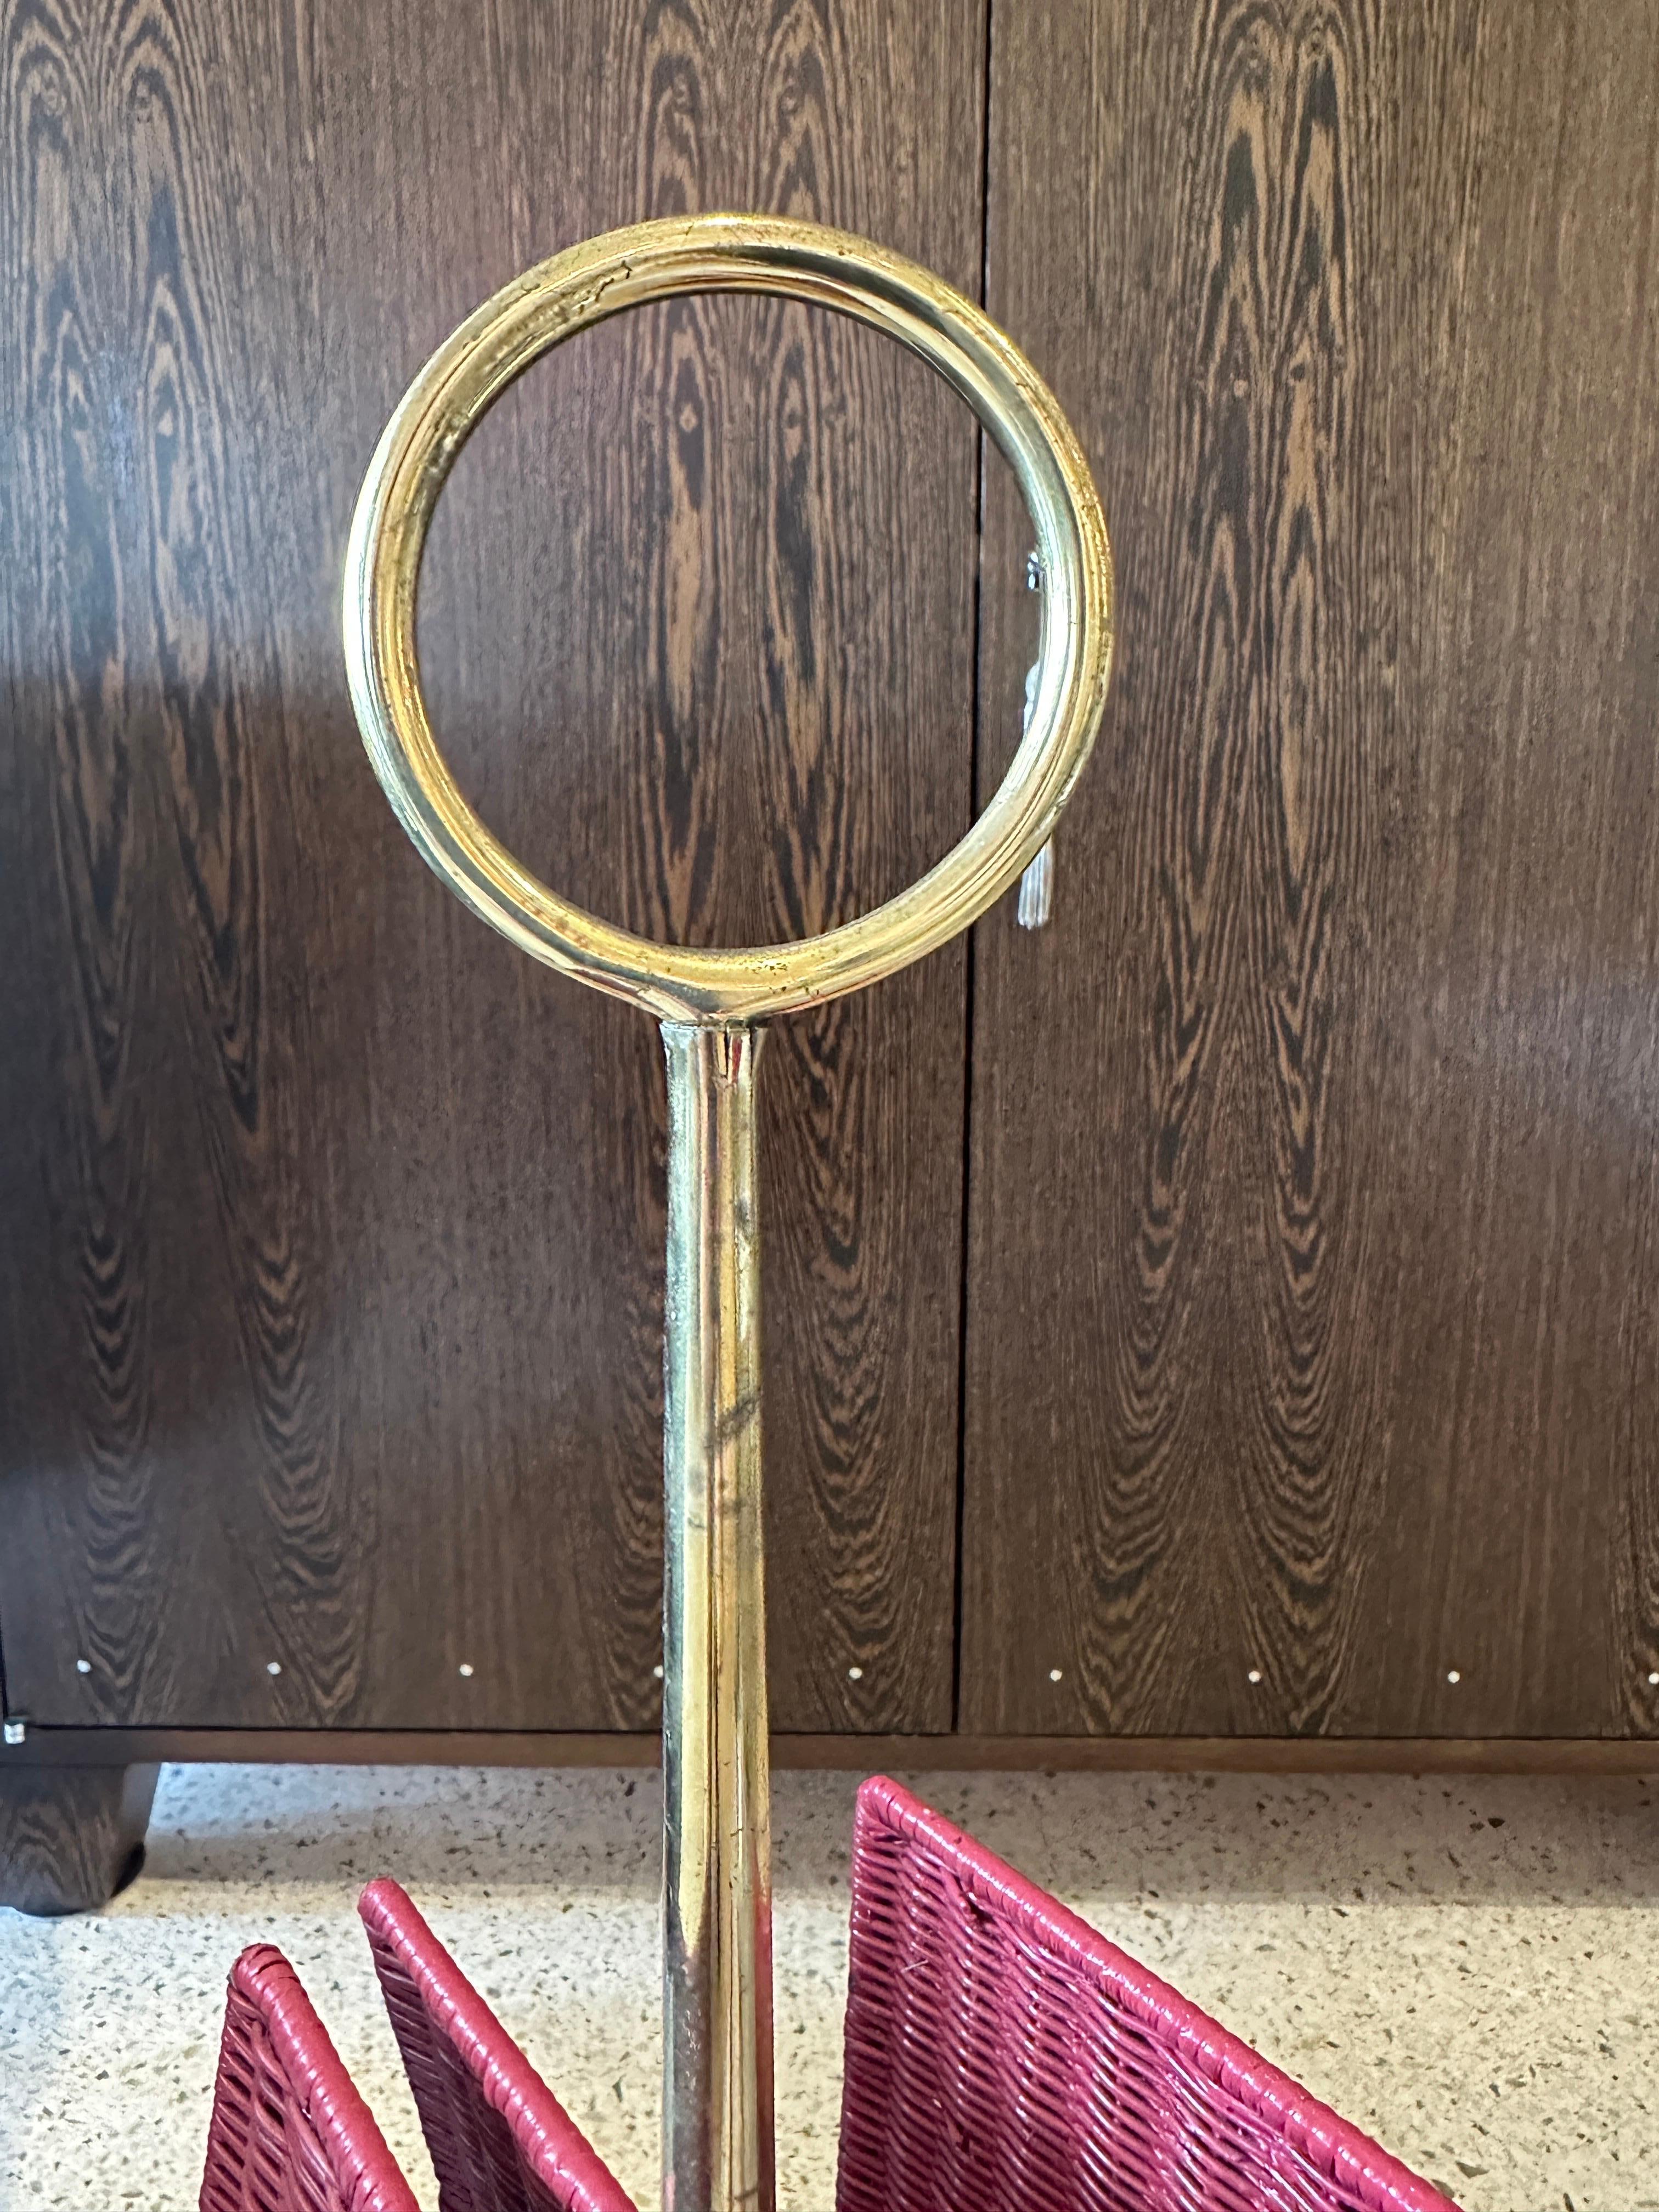 The amazingly classic Italian design of the brass ringlet and sculptural legs makes this magazine stand such an amazing find.  The pink painted wicker floats on this piece of art, holding two areas for magazines, etc.  Chic design is reminiscent of